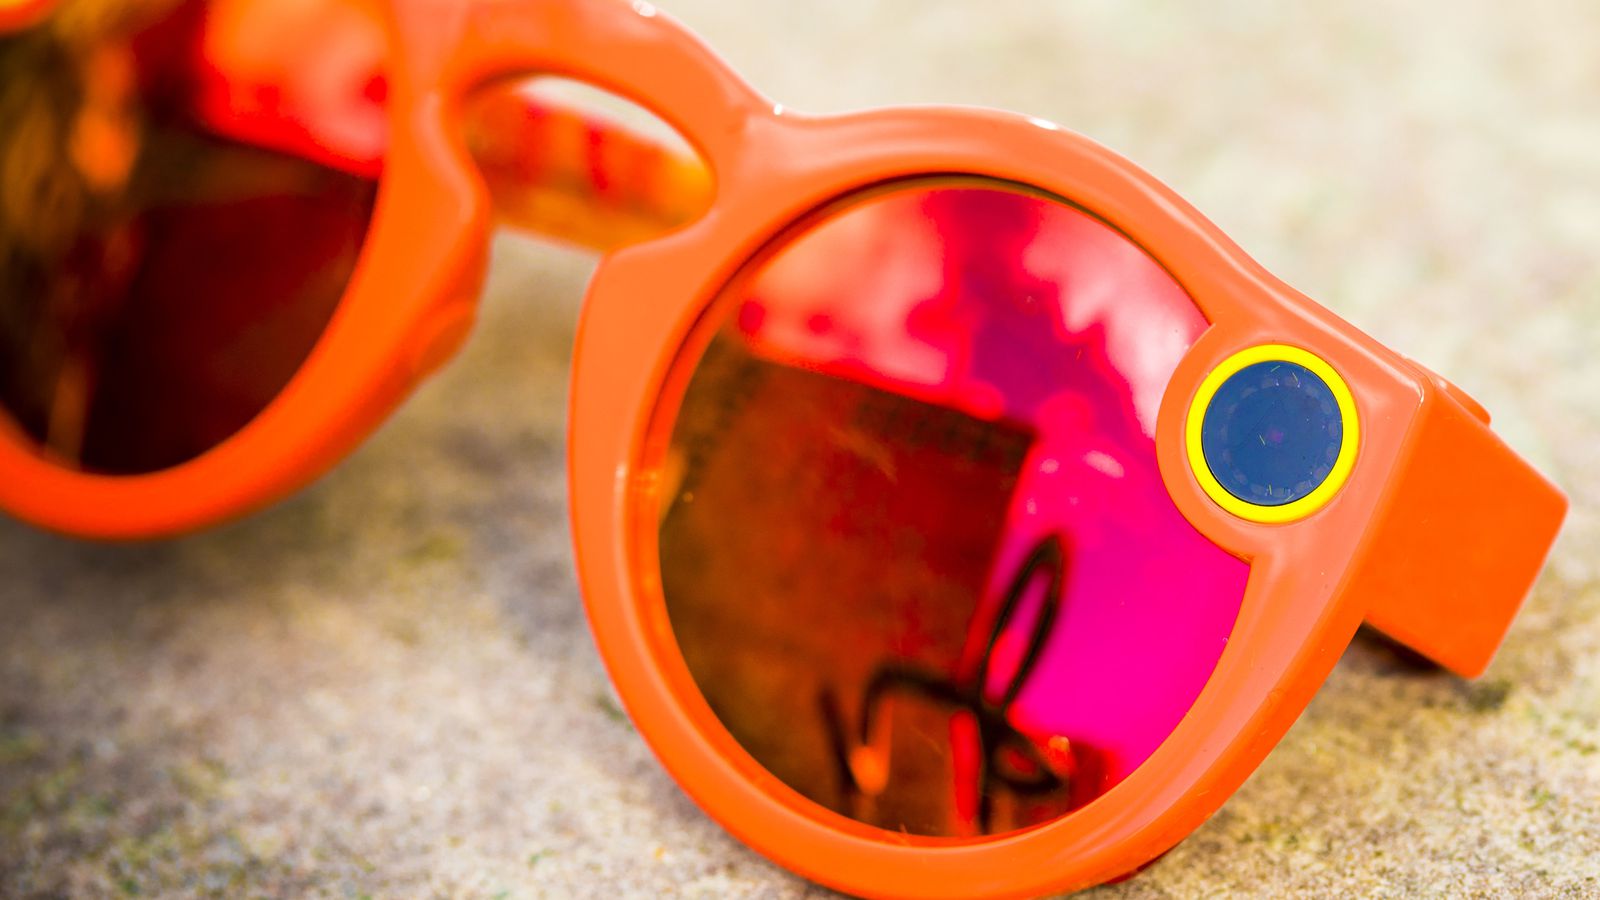 A High Schooler Reviews Snapchat Spectacles Glasses Snapchat Spectacles Red 1450986 Hd Wallpaper Backgrounds Download On this page, pngtree offers free hd snapchat icon png images with transparent background and vector files. itl cat